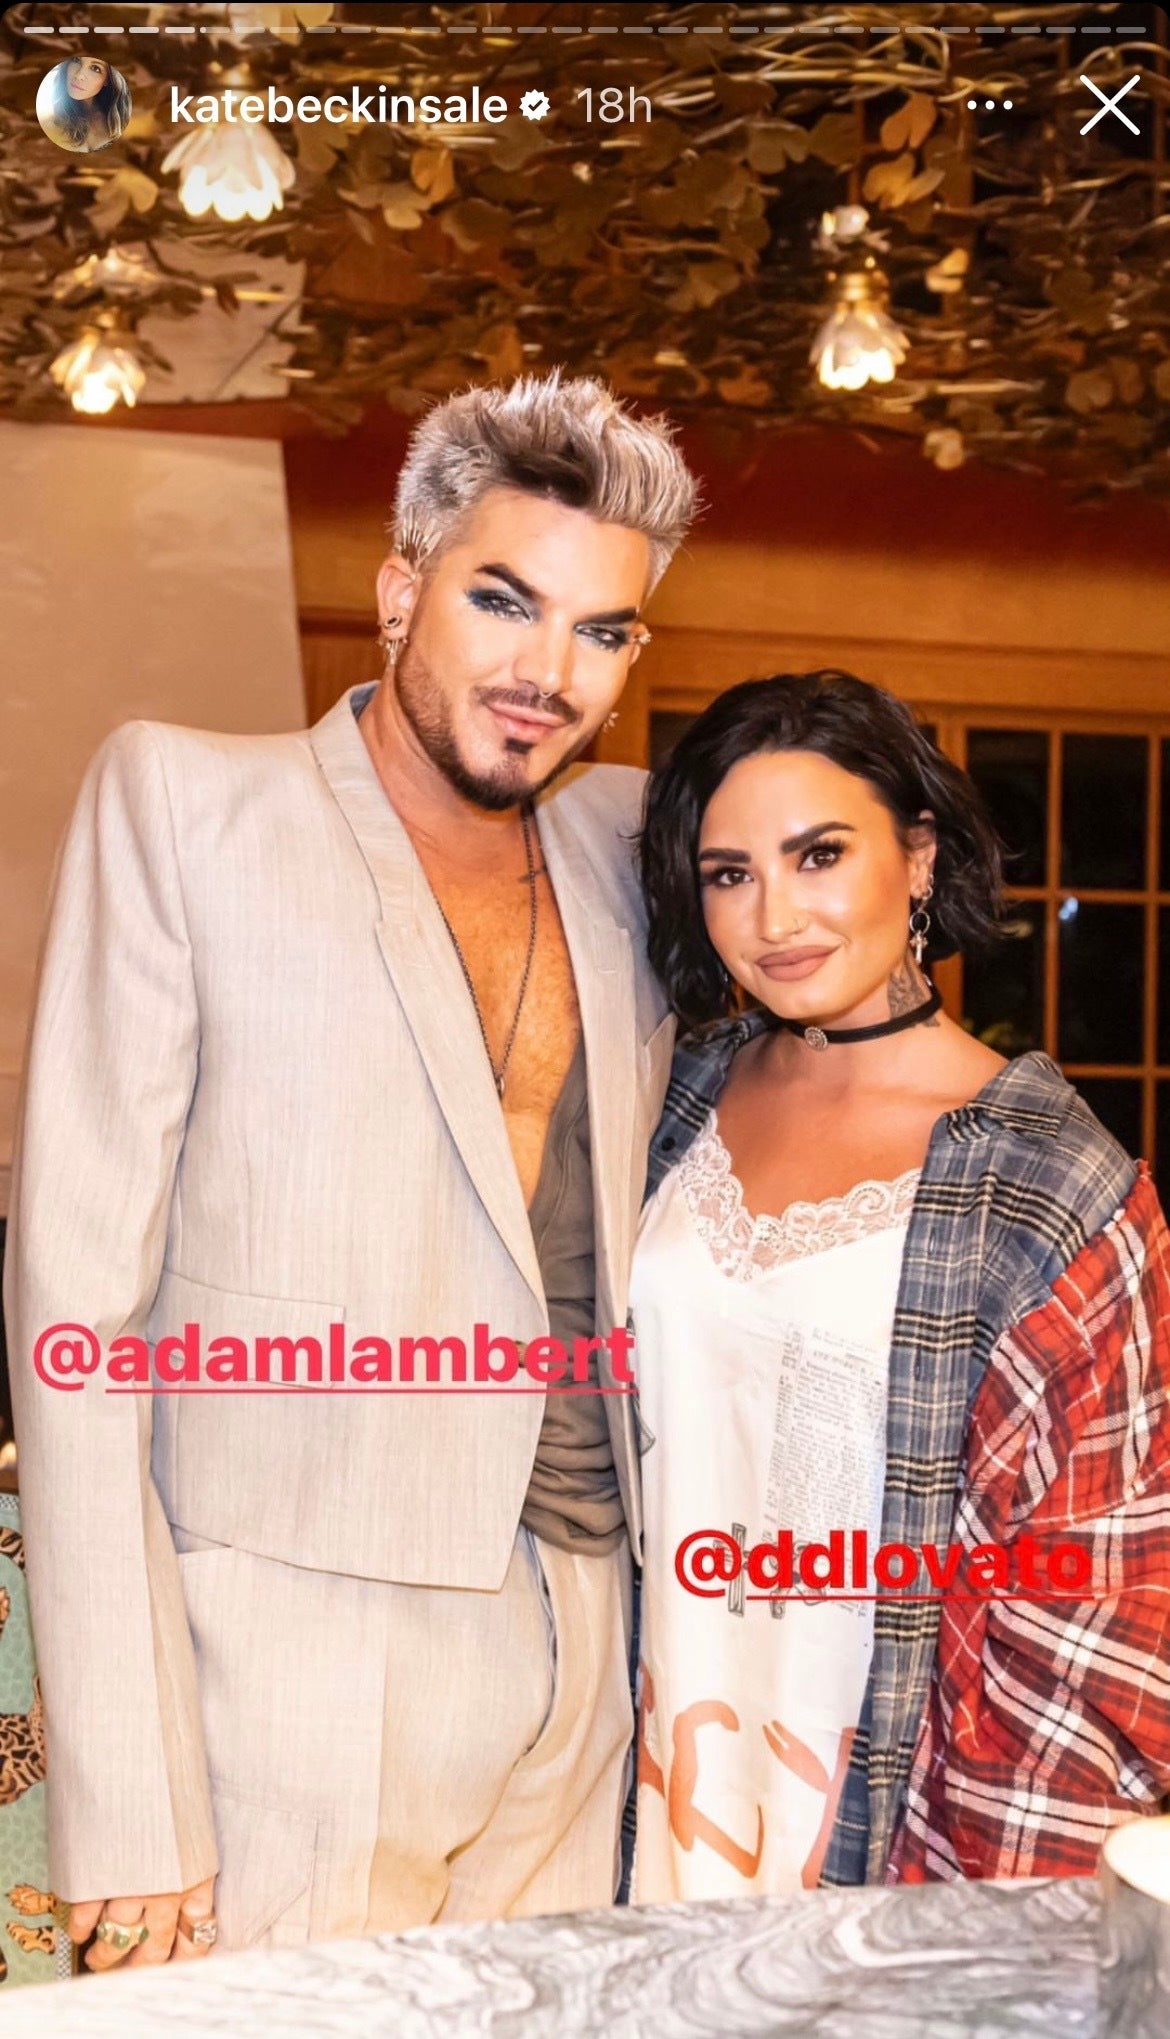 Adam Lambert and Demi Lovato at a birthday party